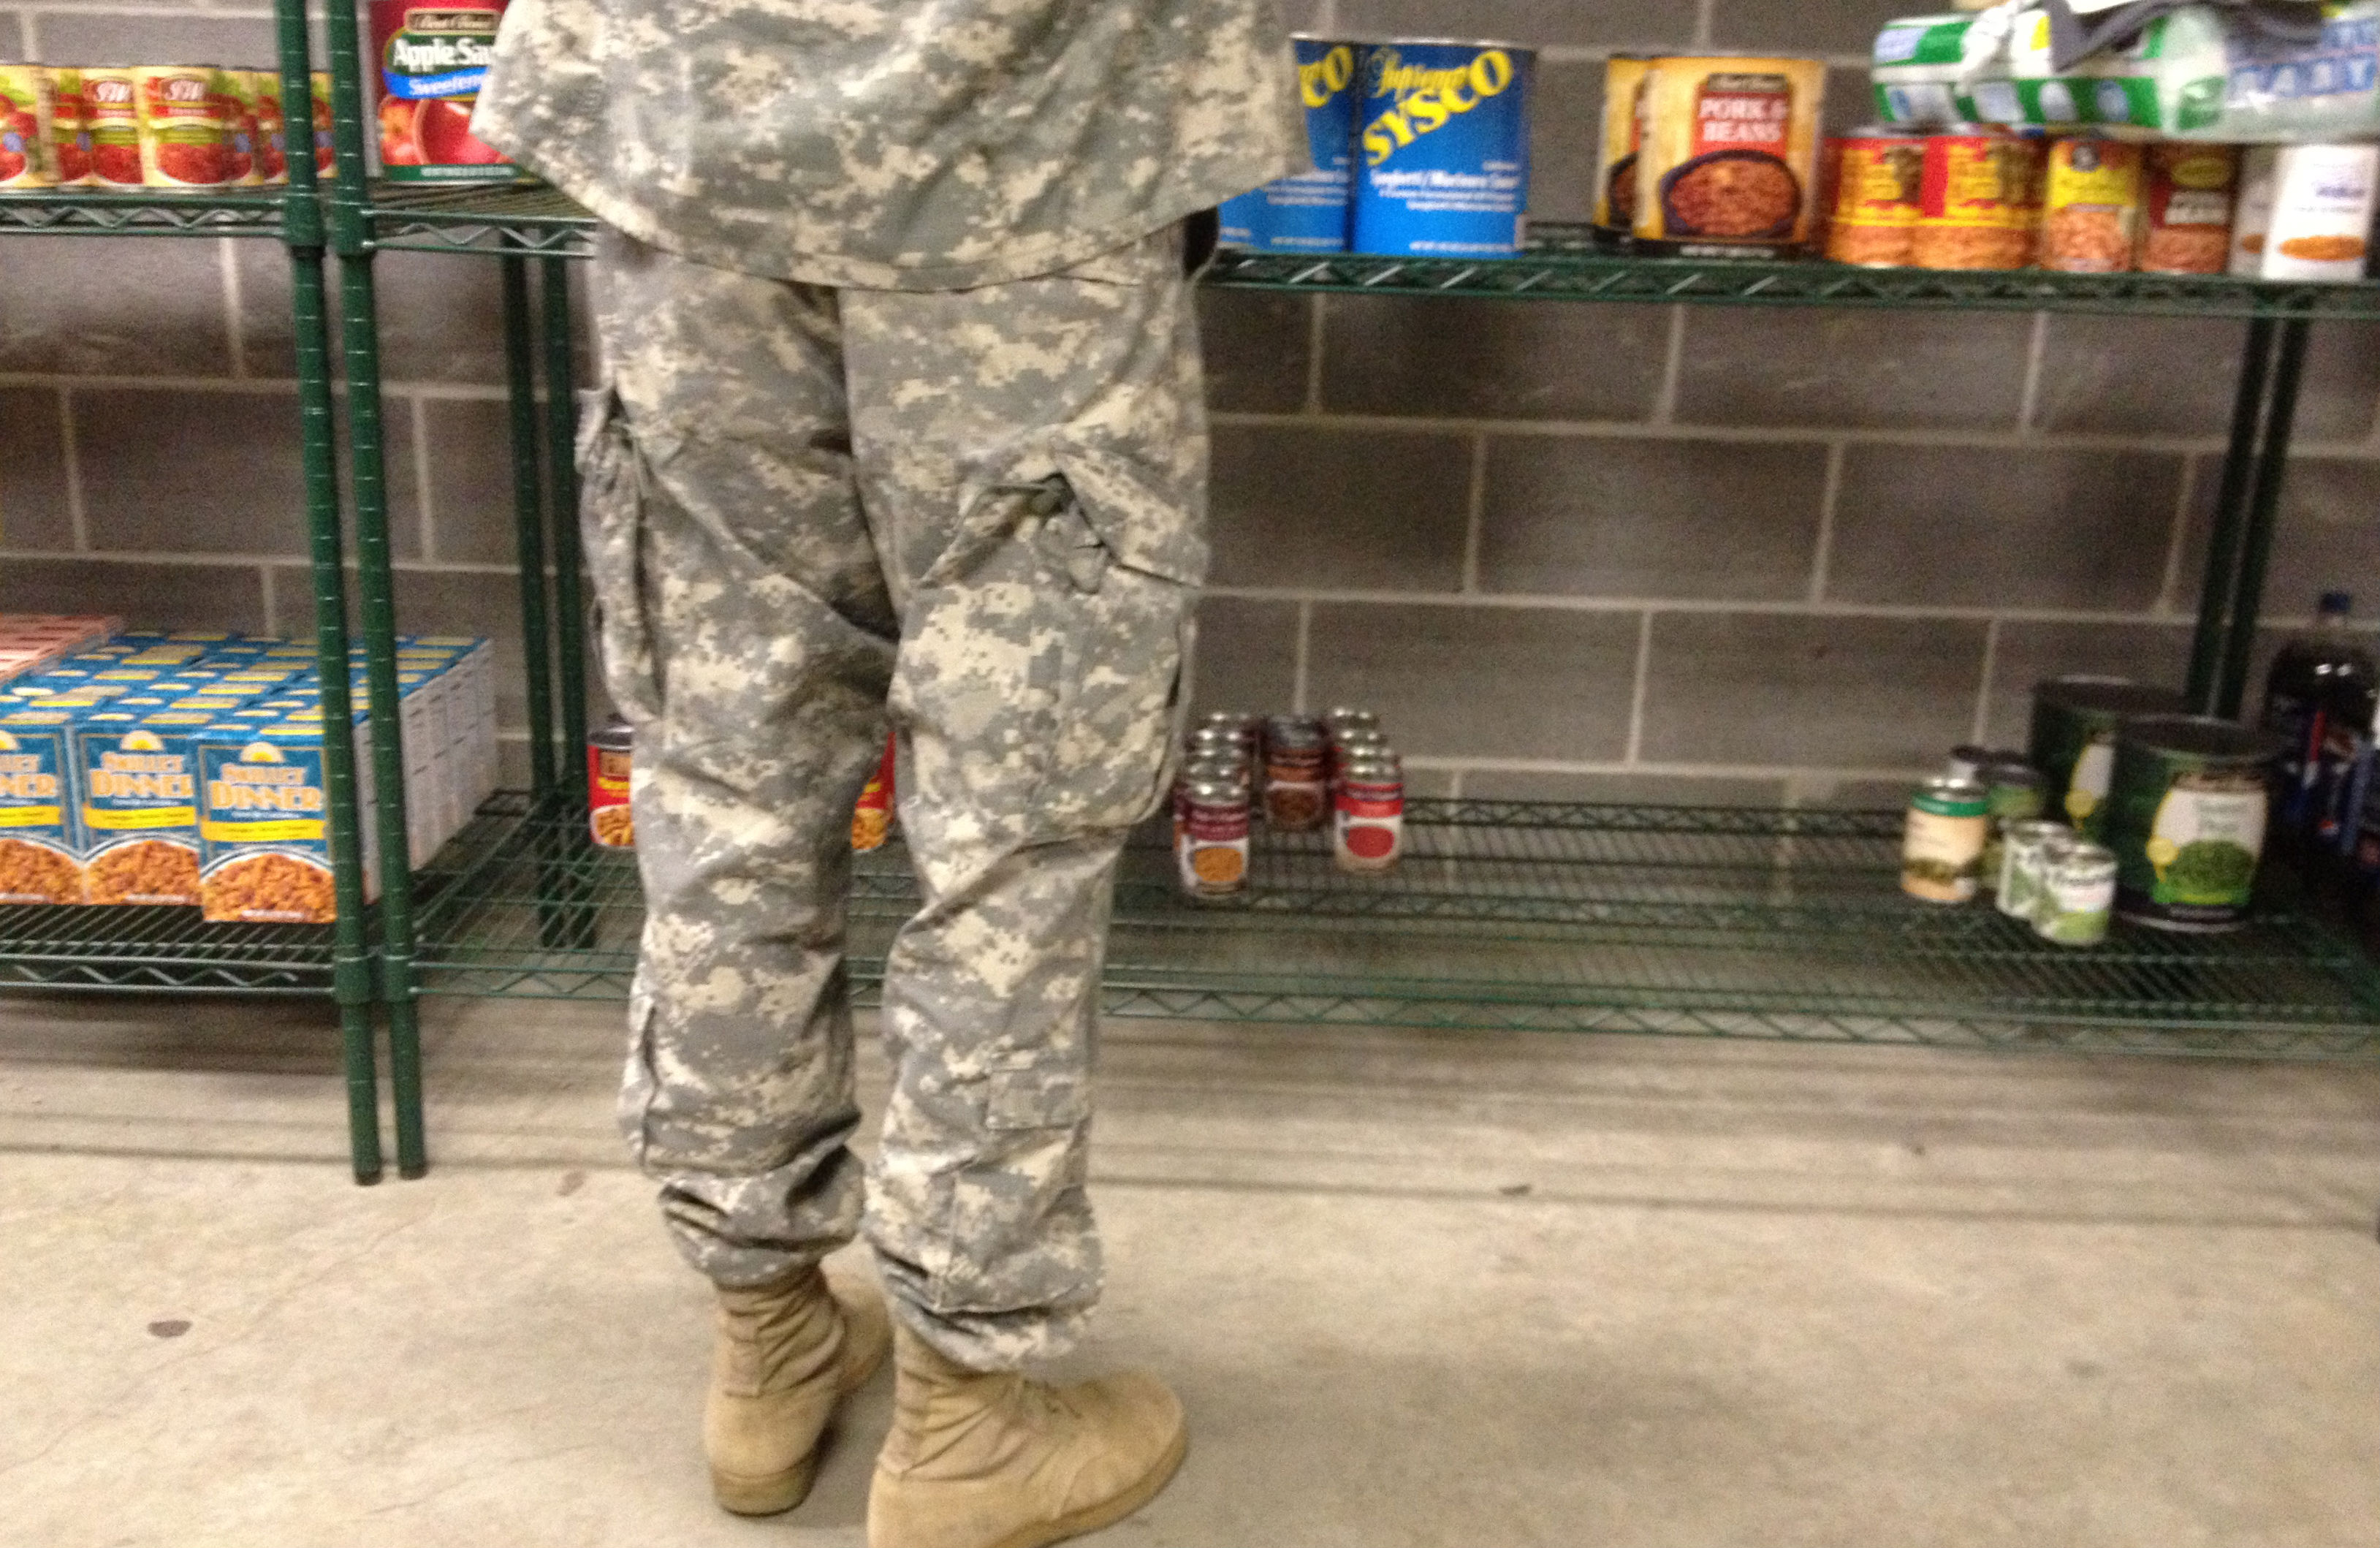 620,000 Military Families Rely on Food Pantries to Meet Basic Needs